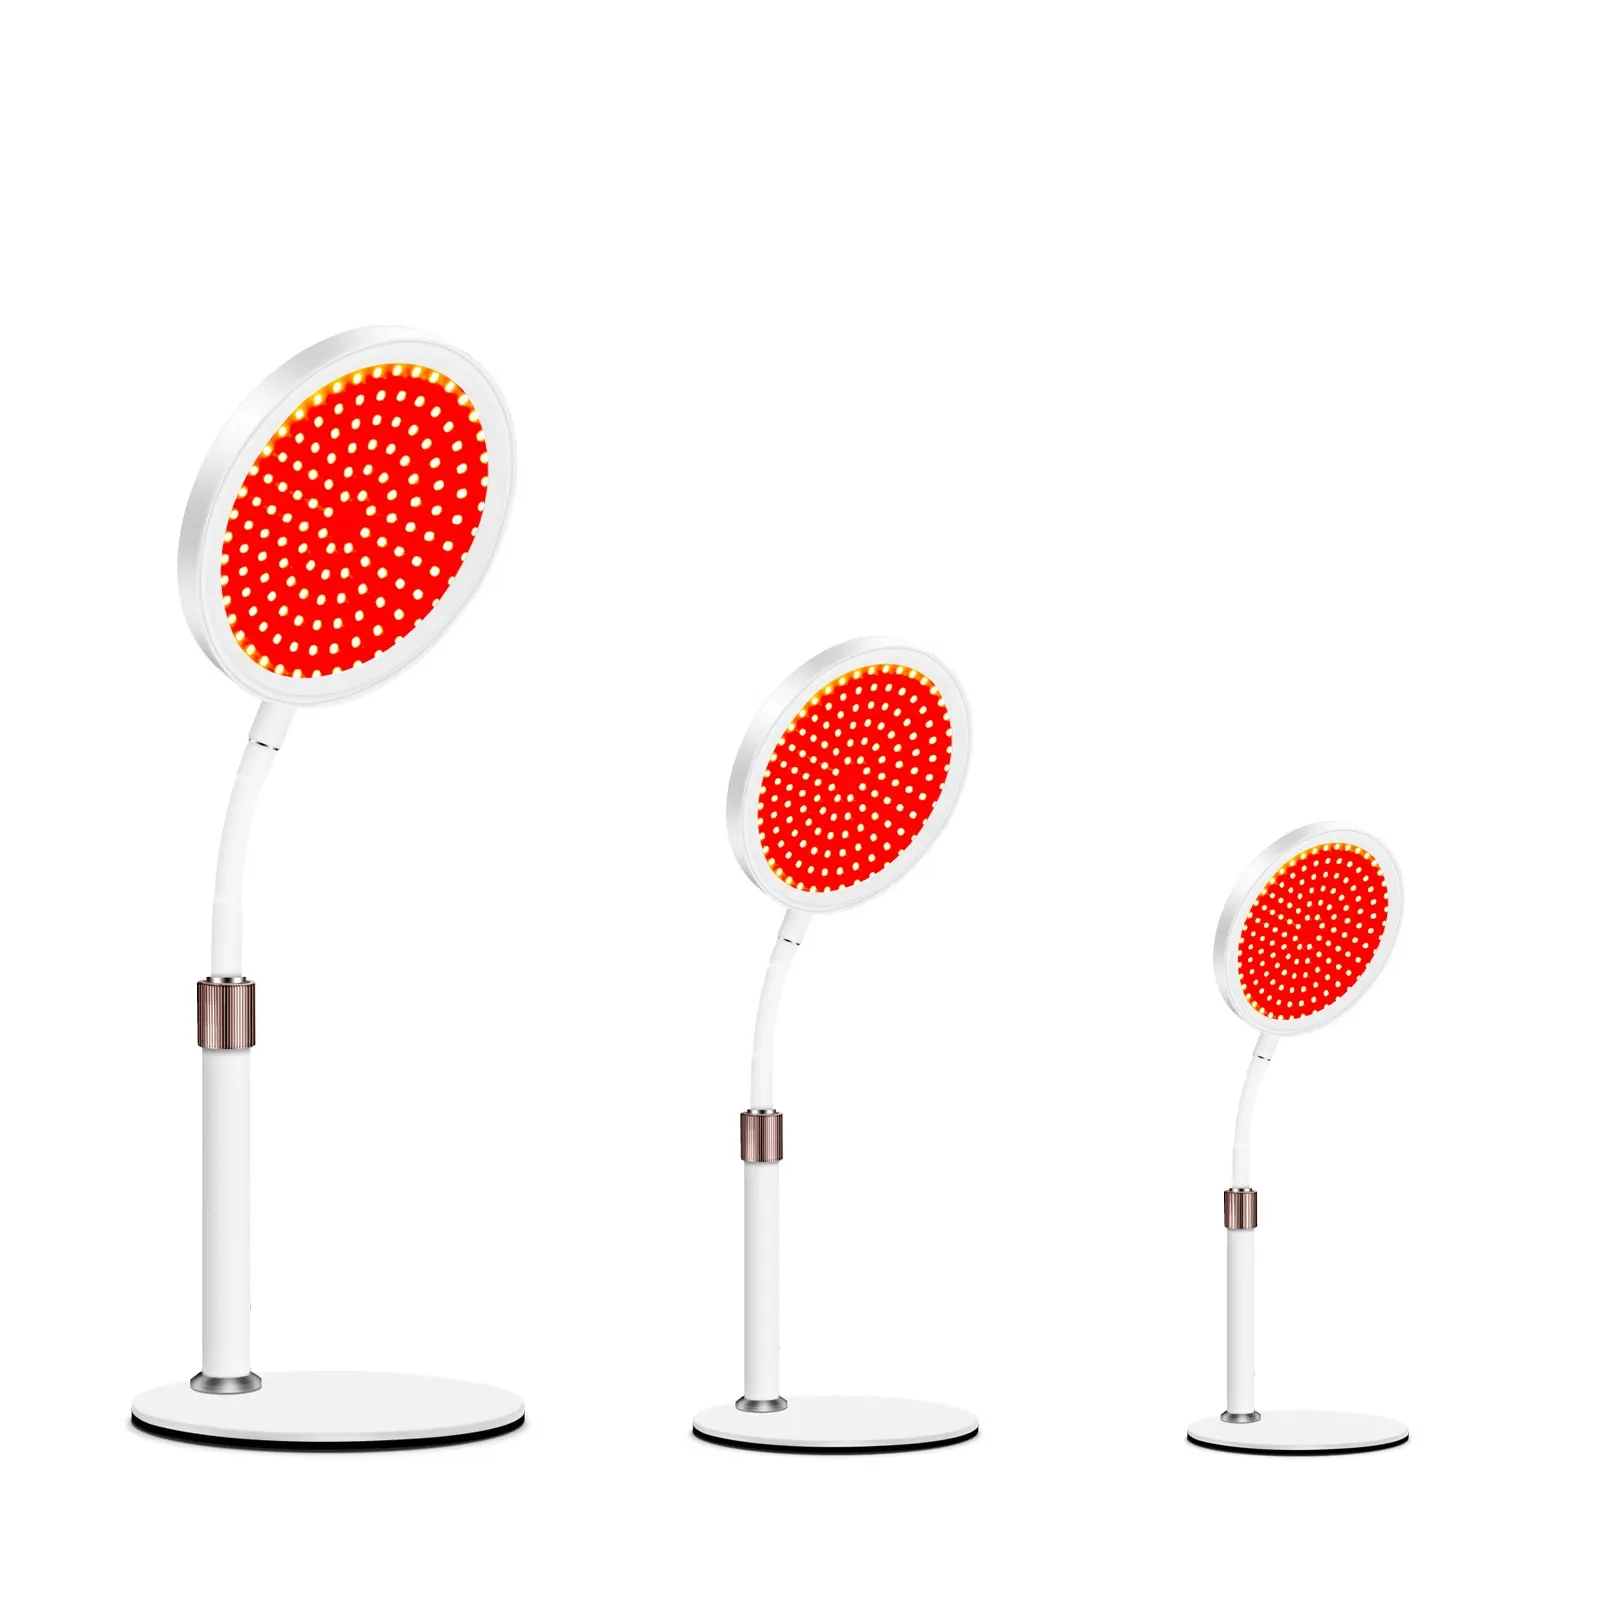 New product desktop light-emitting diode phototherapy therapy portable hand red light therapy manufacturer can customize